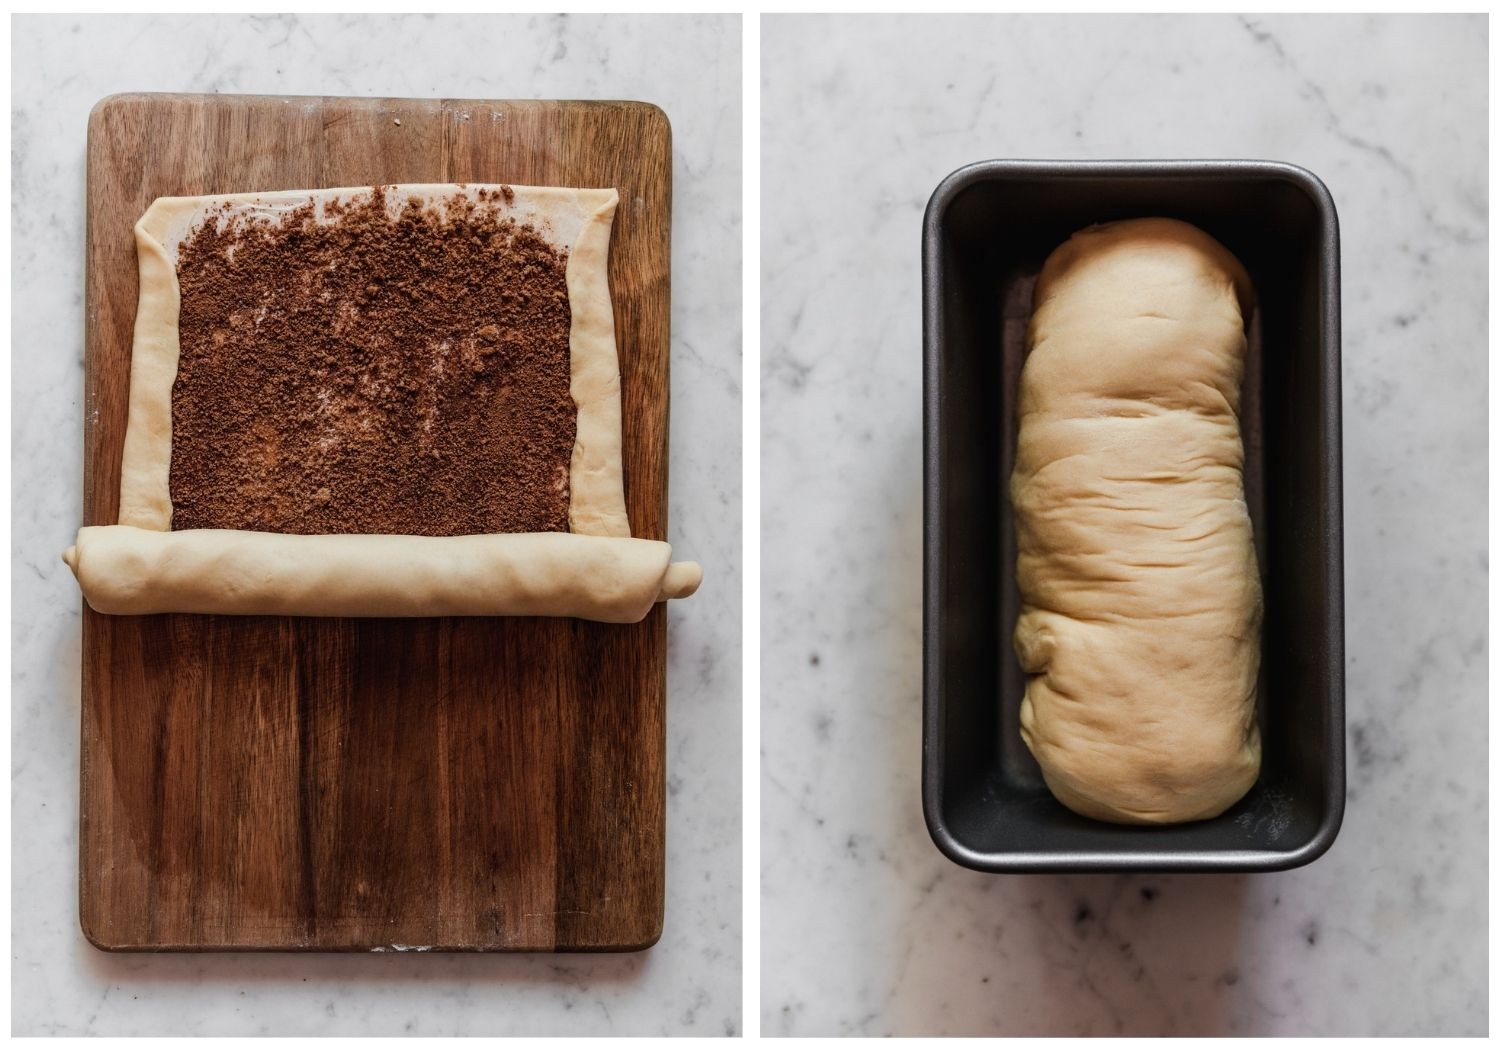 Two overhead images. On the left, a wood cutting board with a large rectangle of dough sprinkled with cinnamon sugar being rolled up. On the right, a metal baking pan with a loaf of dough in it.